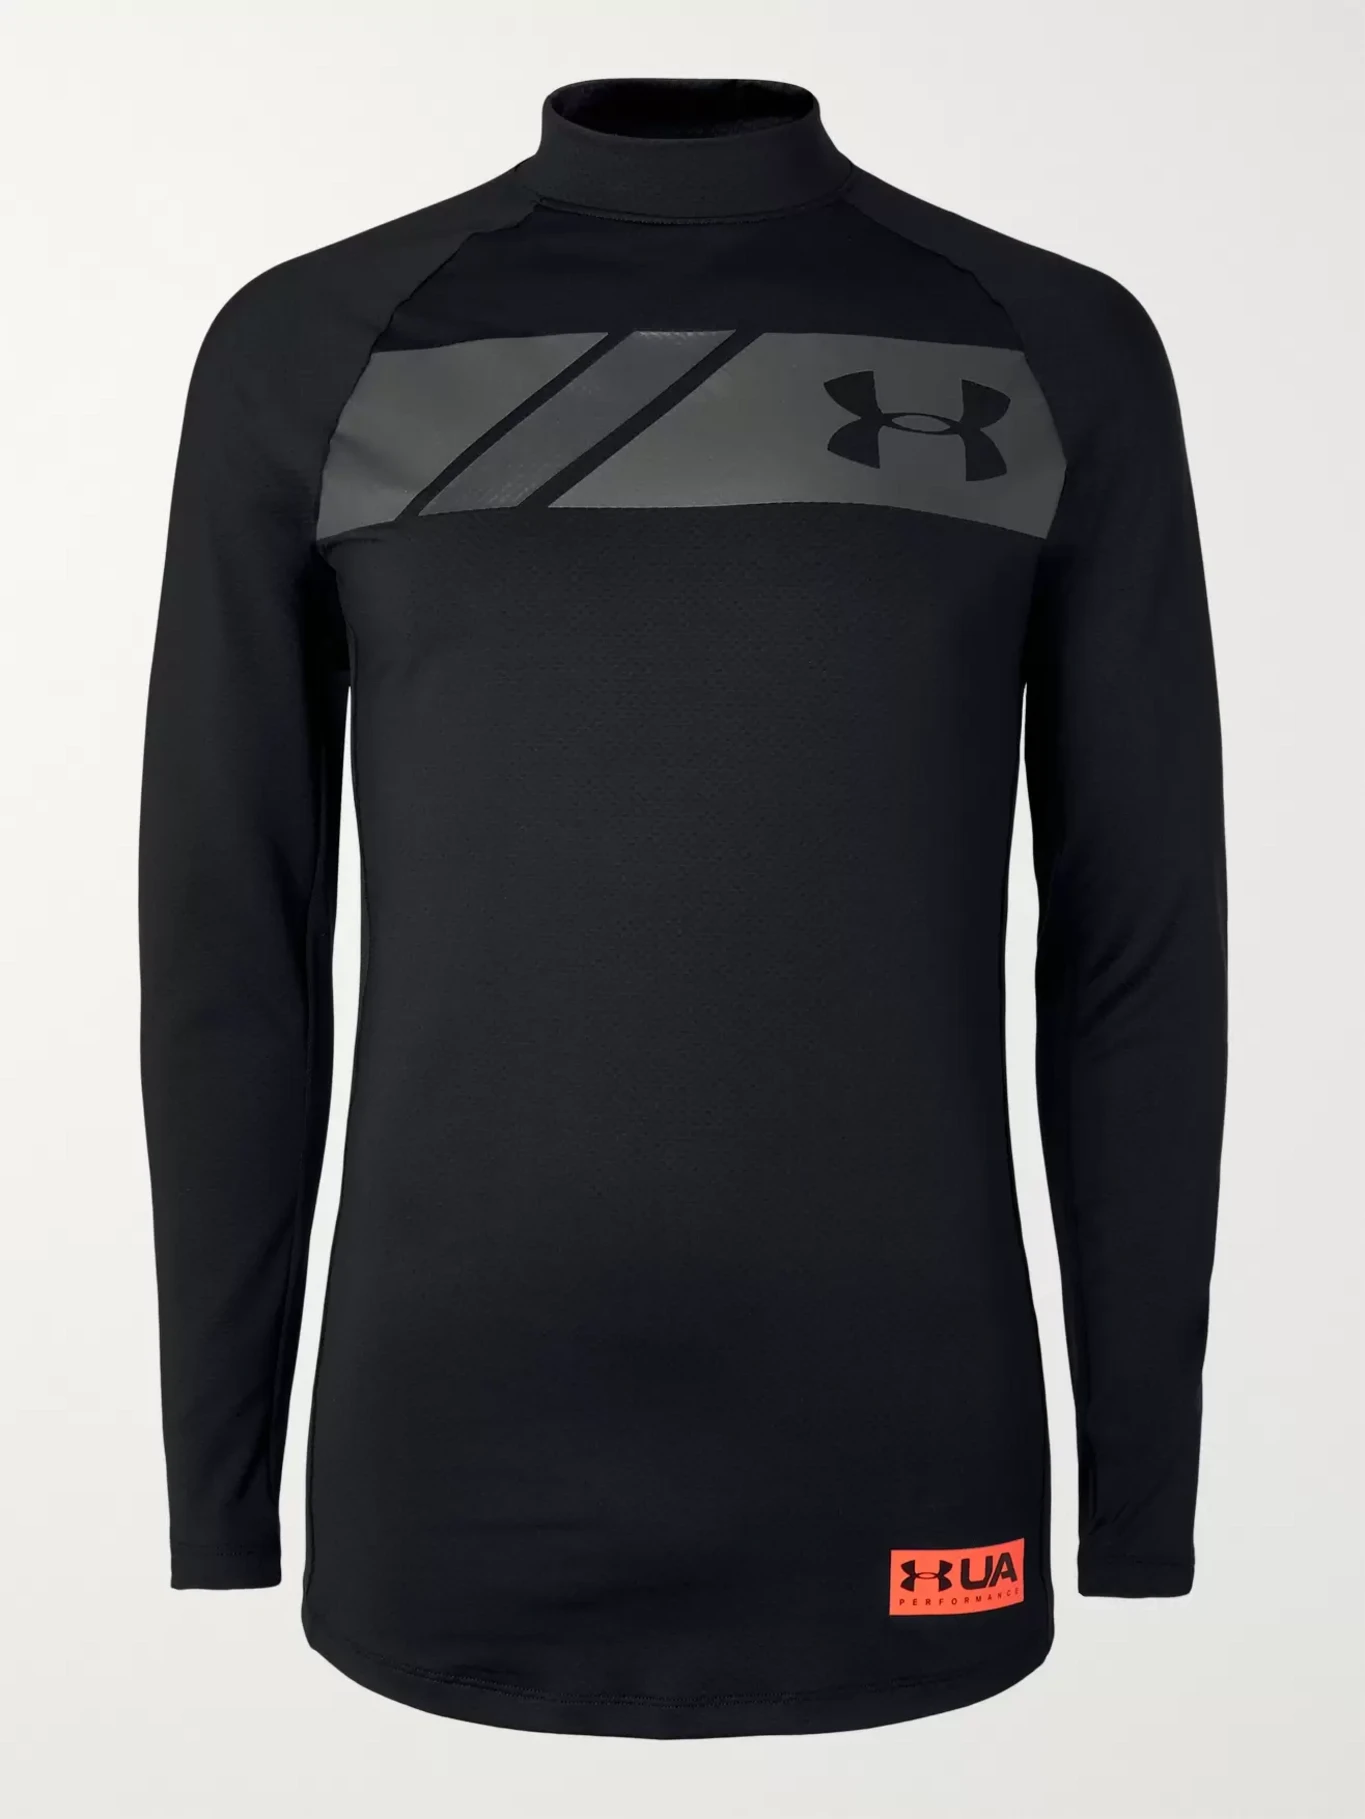 under armour cold gear mock neck